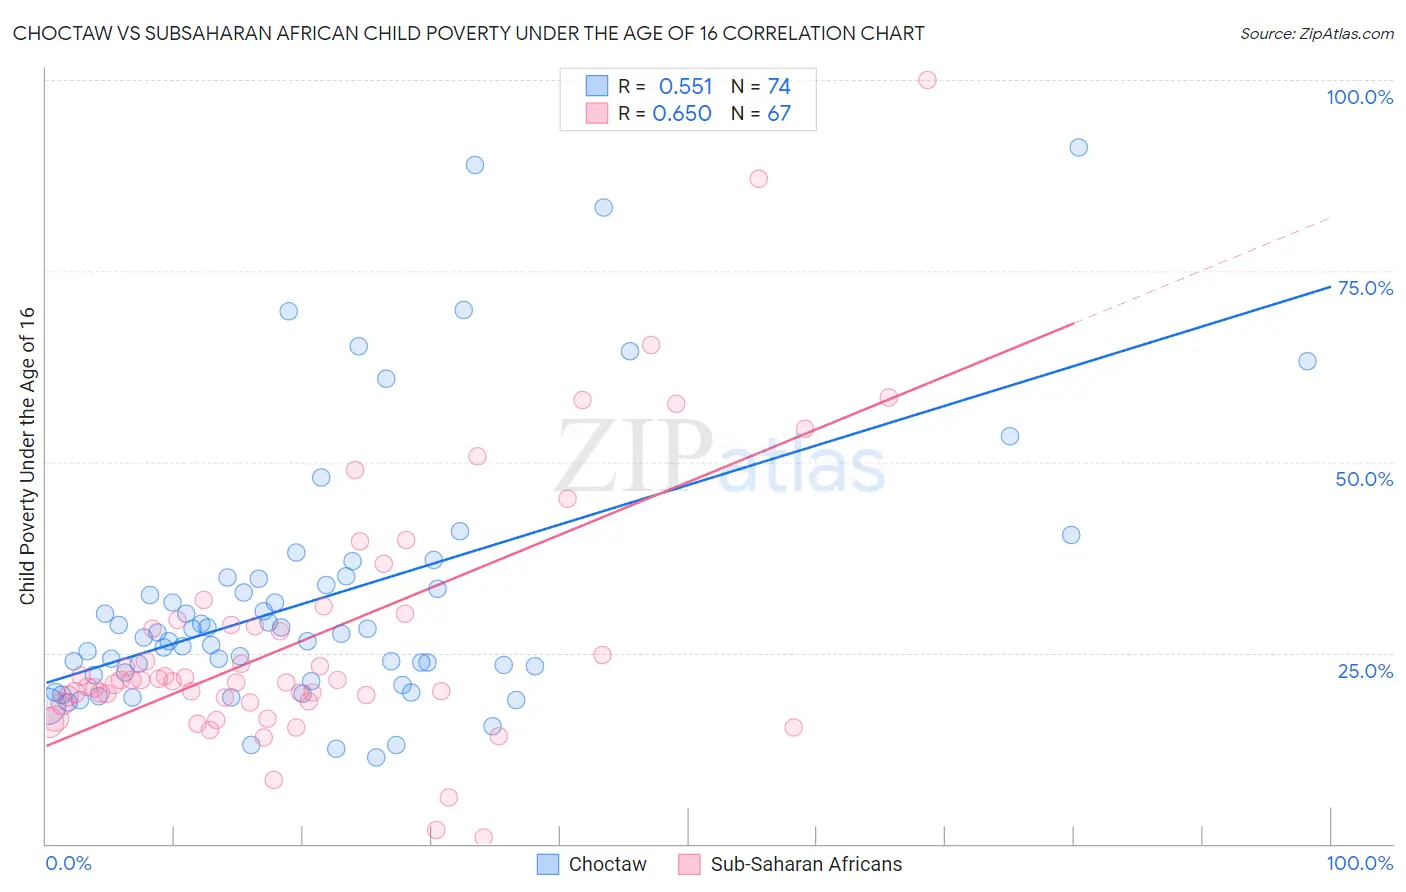 Choctaw vs Subsaharan African Child Poverty Under the Age of 16